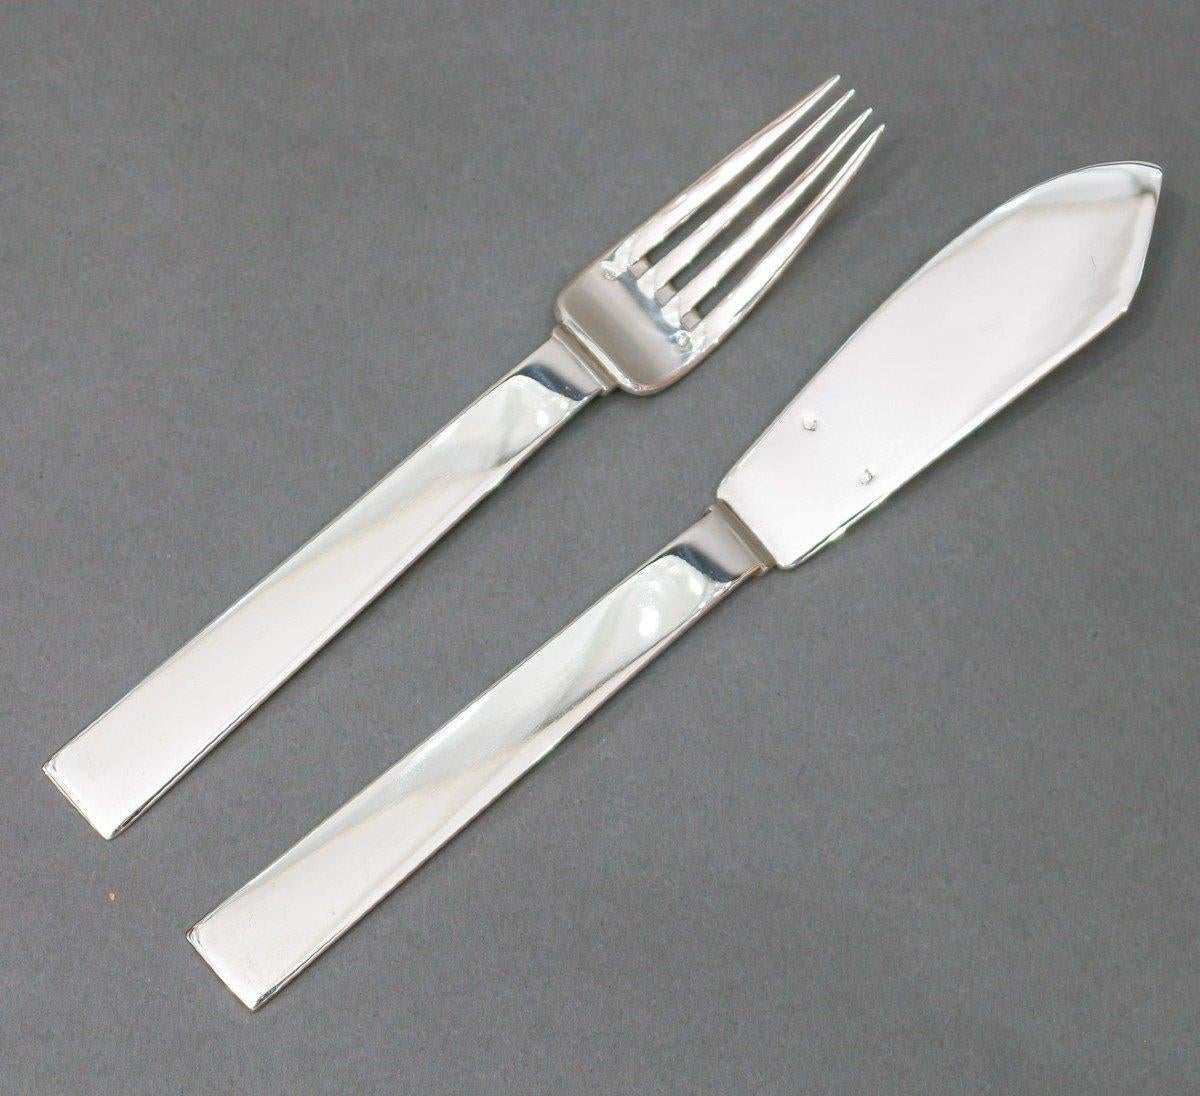 Set of 12 fish cutlery forks and knives in solid silver, 24 pieces, ART DECO period model, circa 1930.
Documentation 